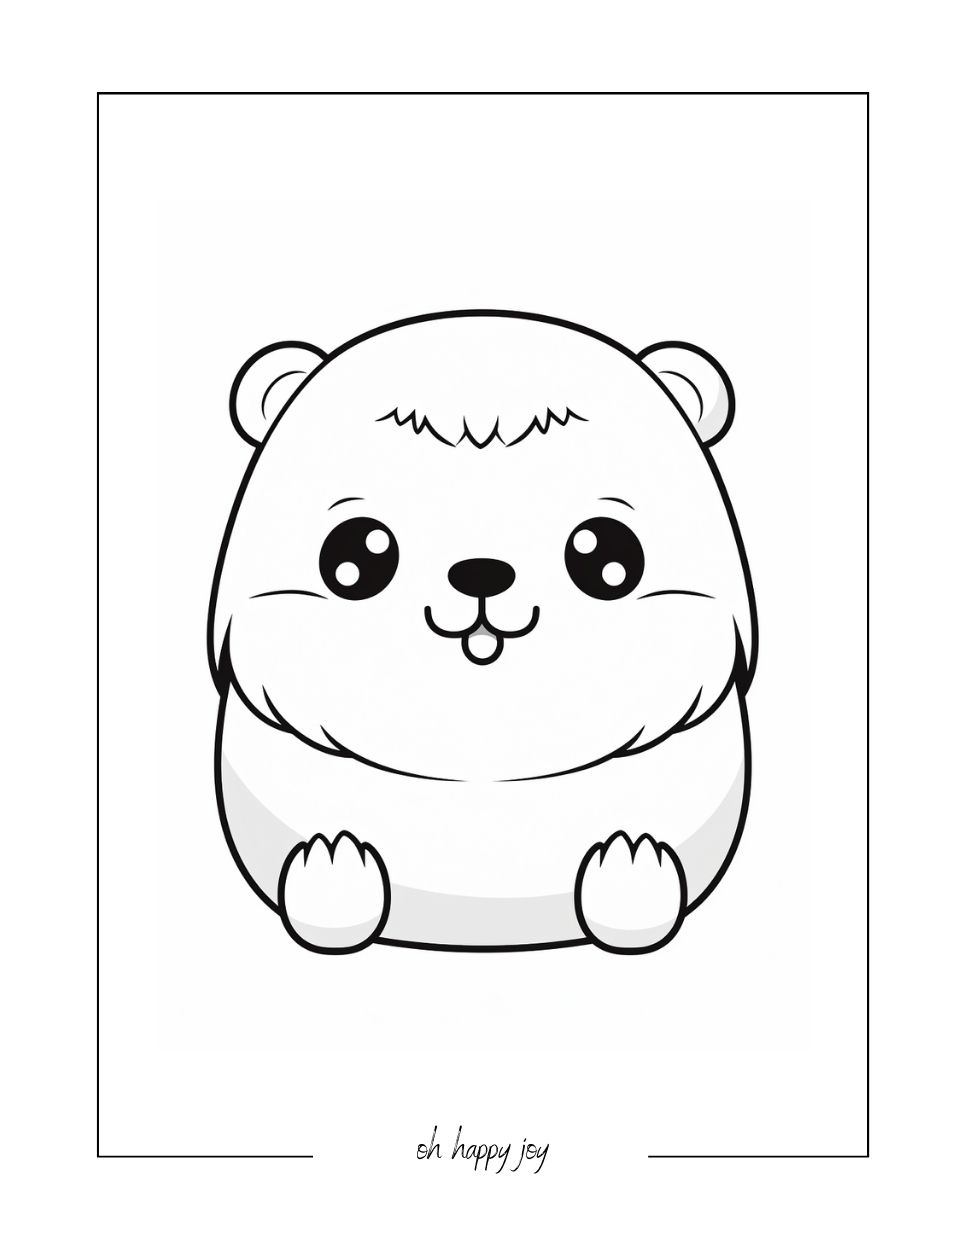 Furry squishmallow coloring page